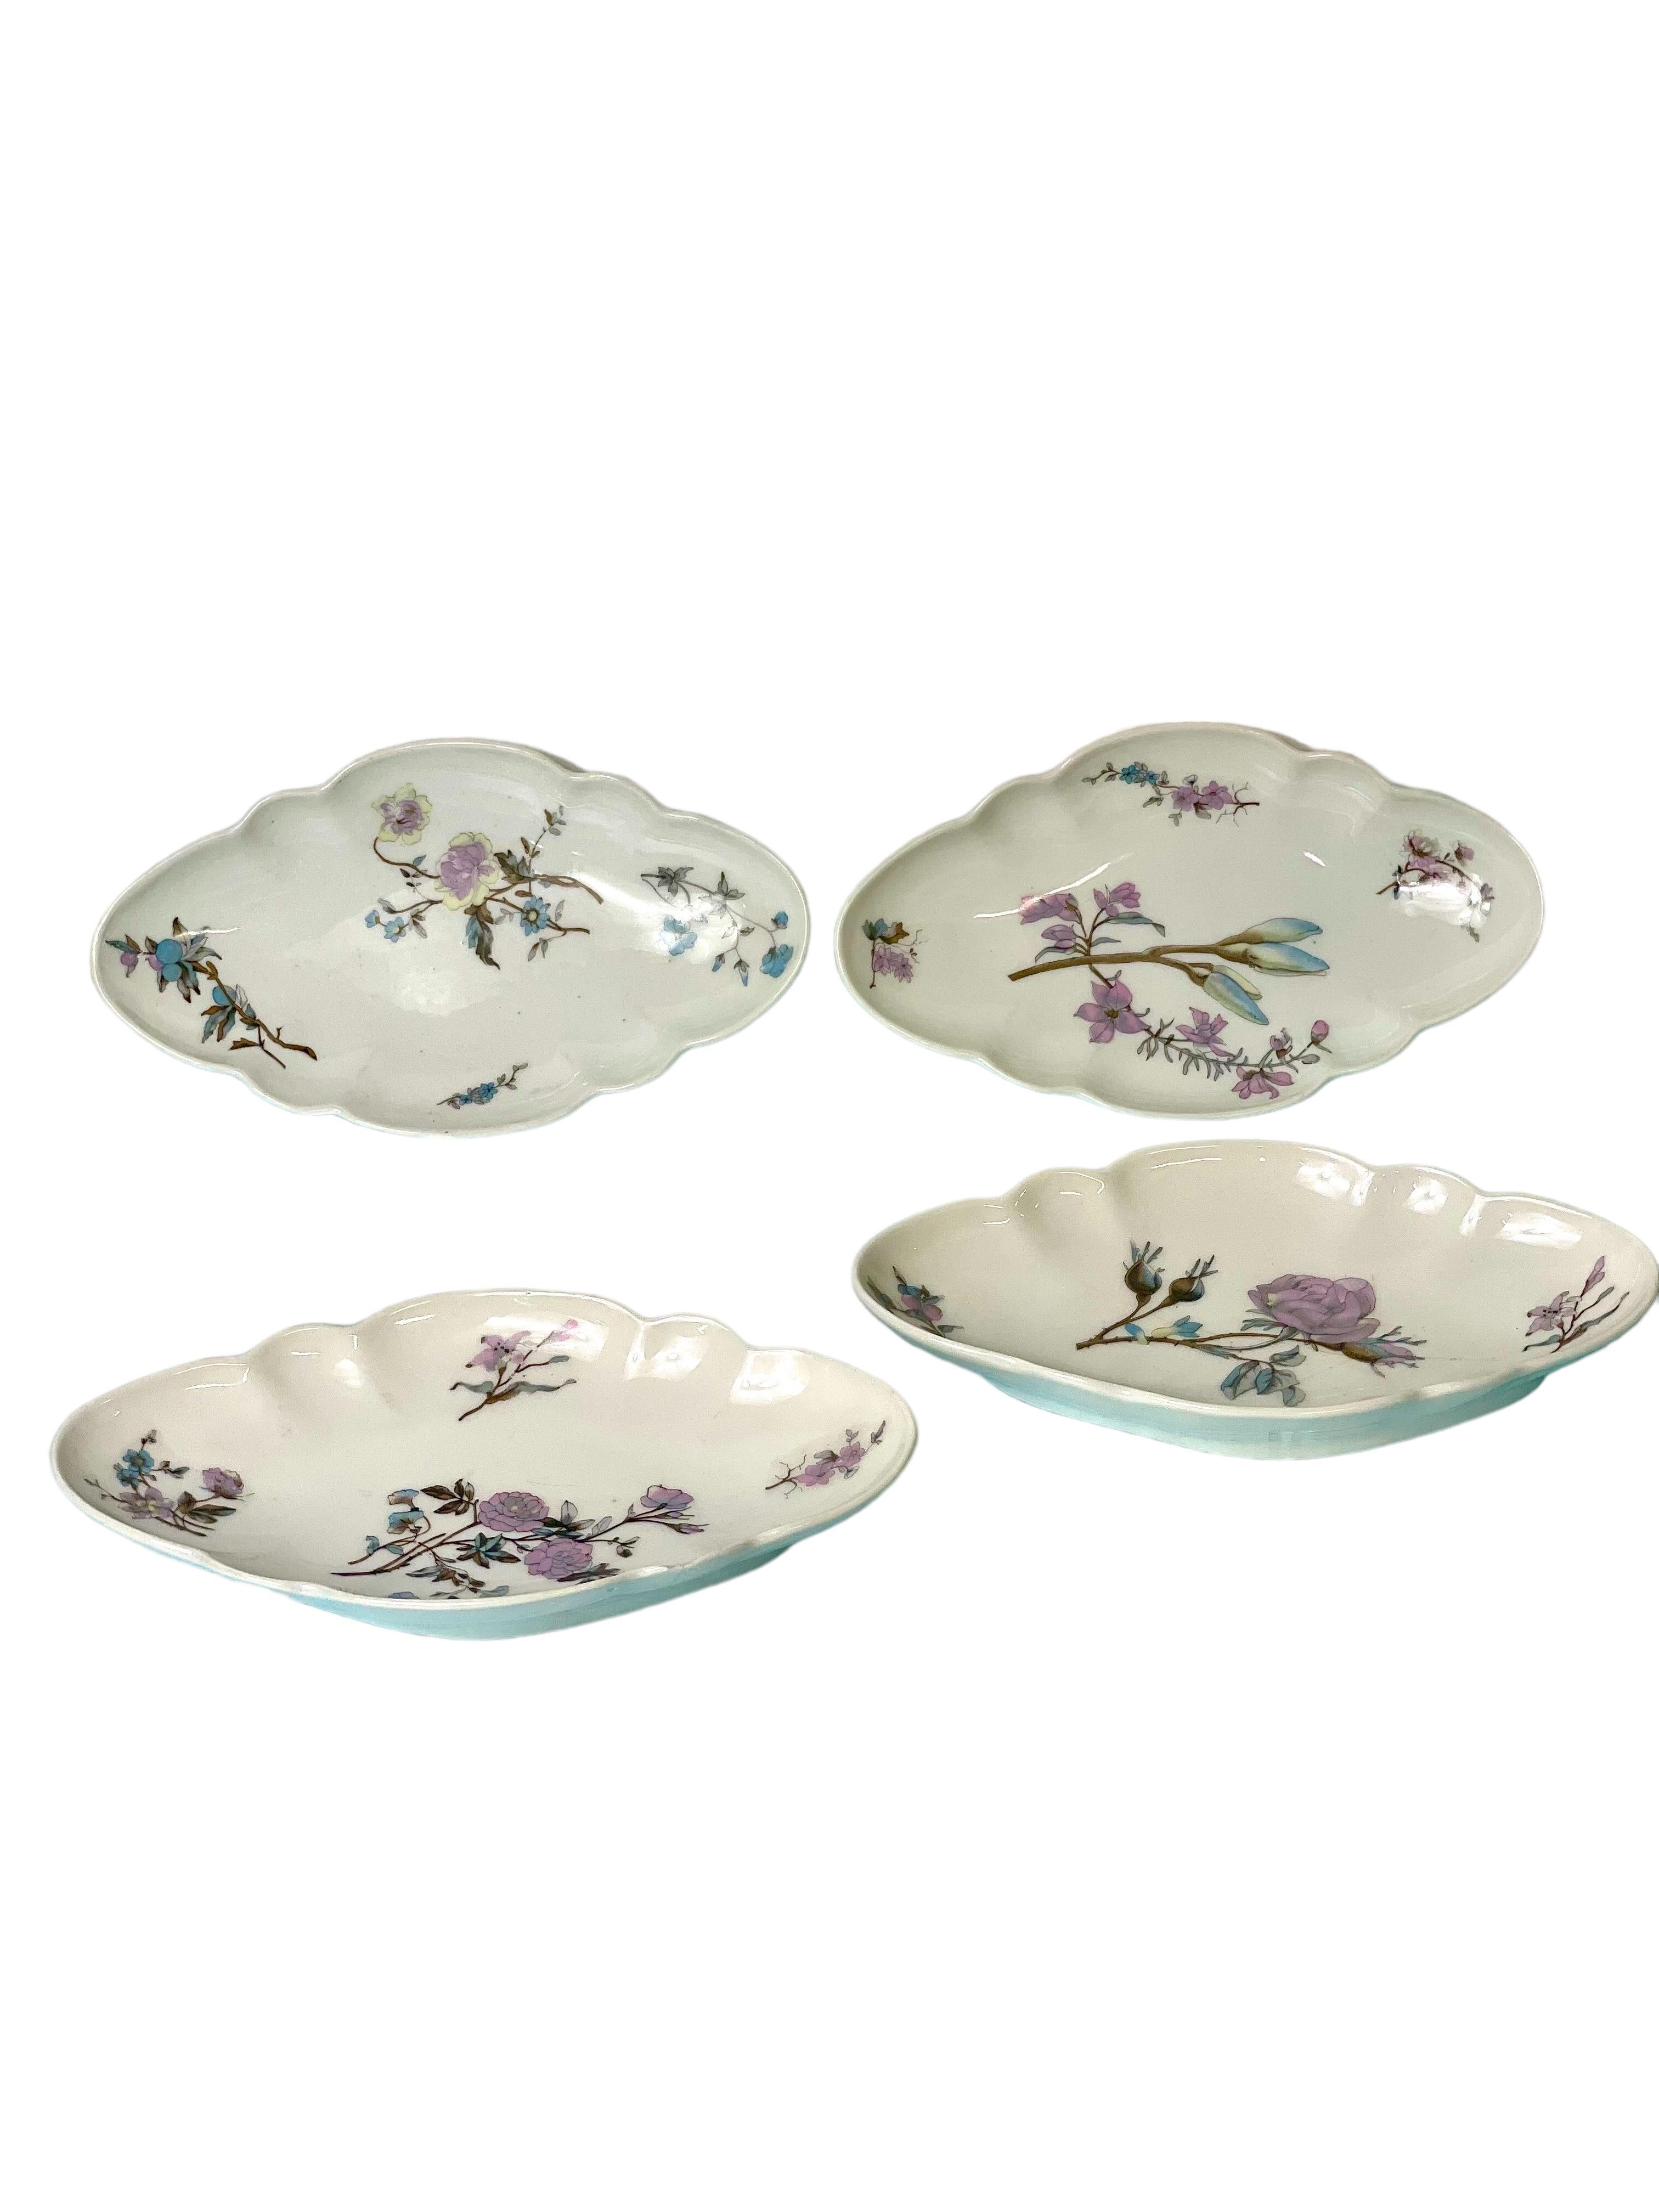 102-Piece Porcelain Dinner Service with Flowers and Butterflies 8